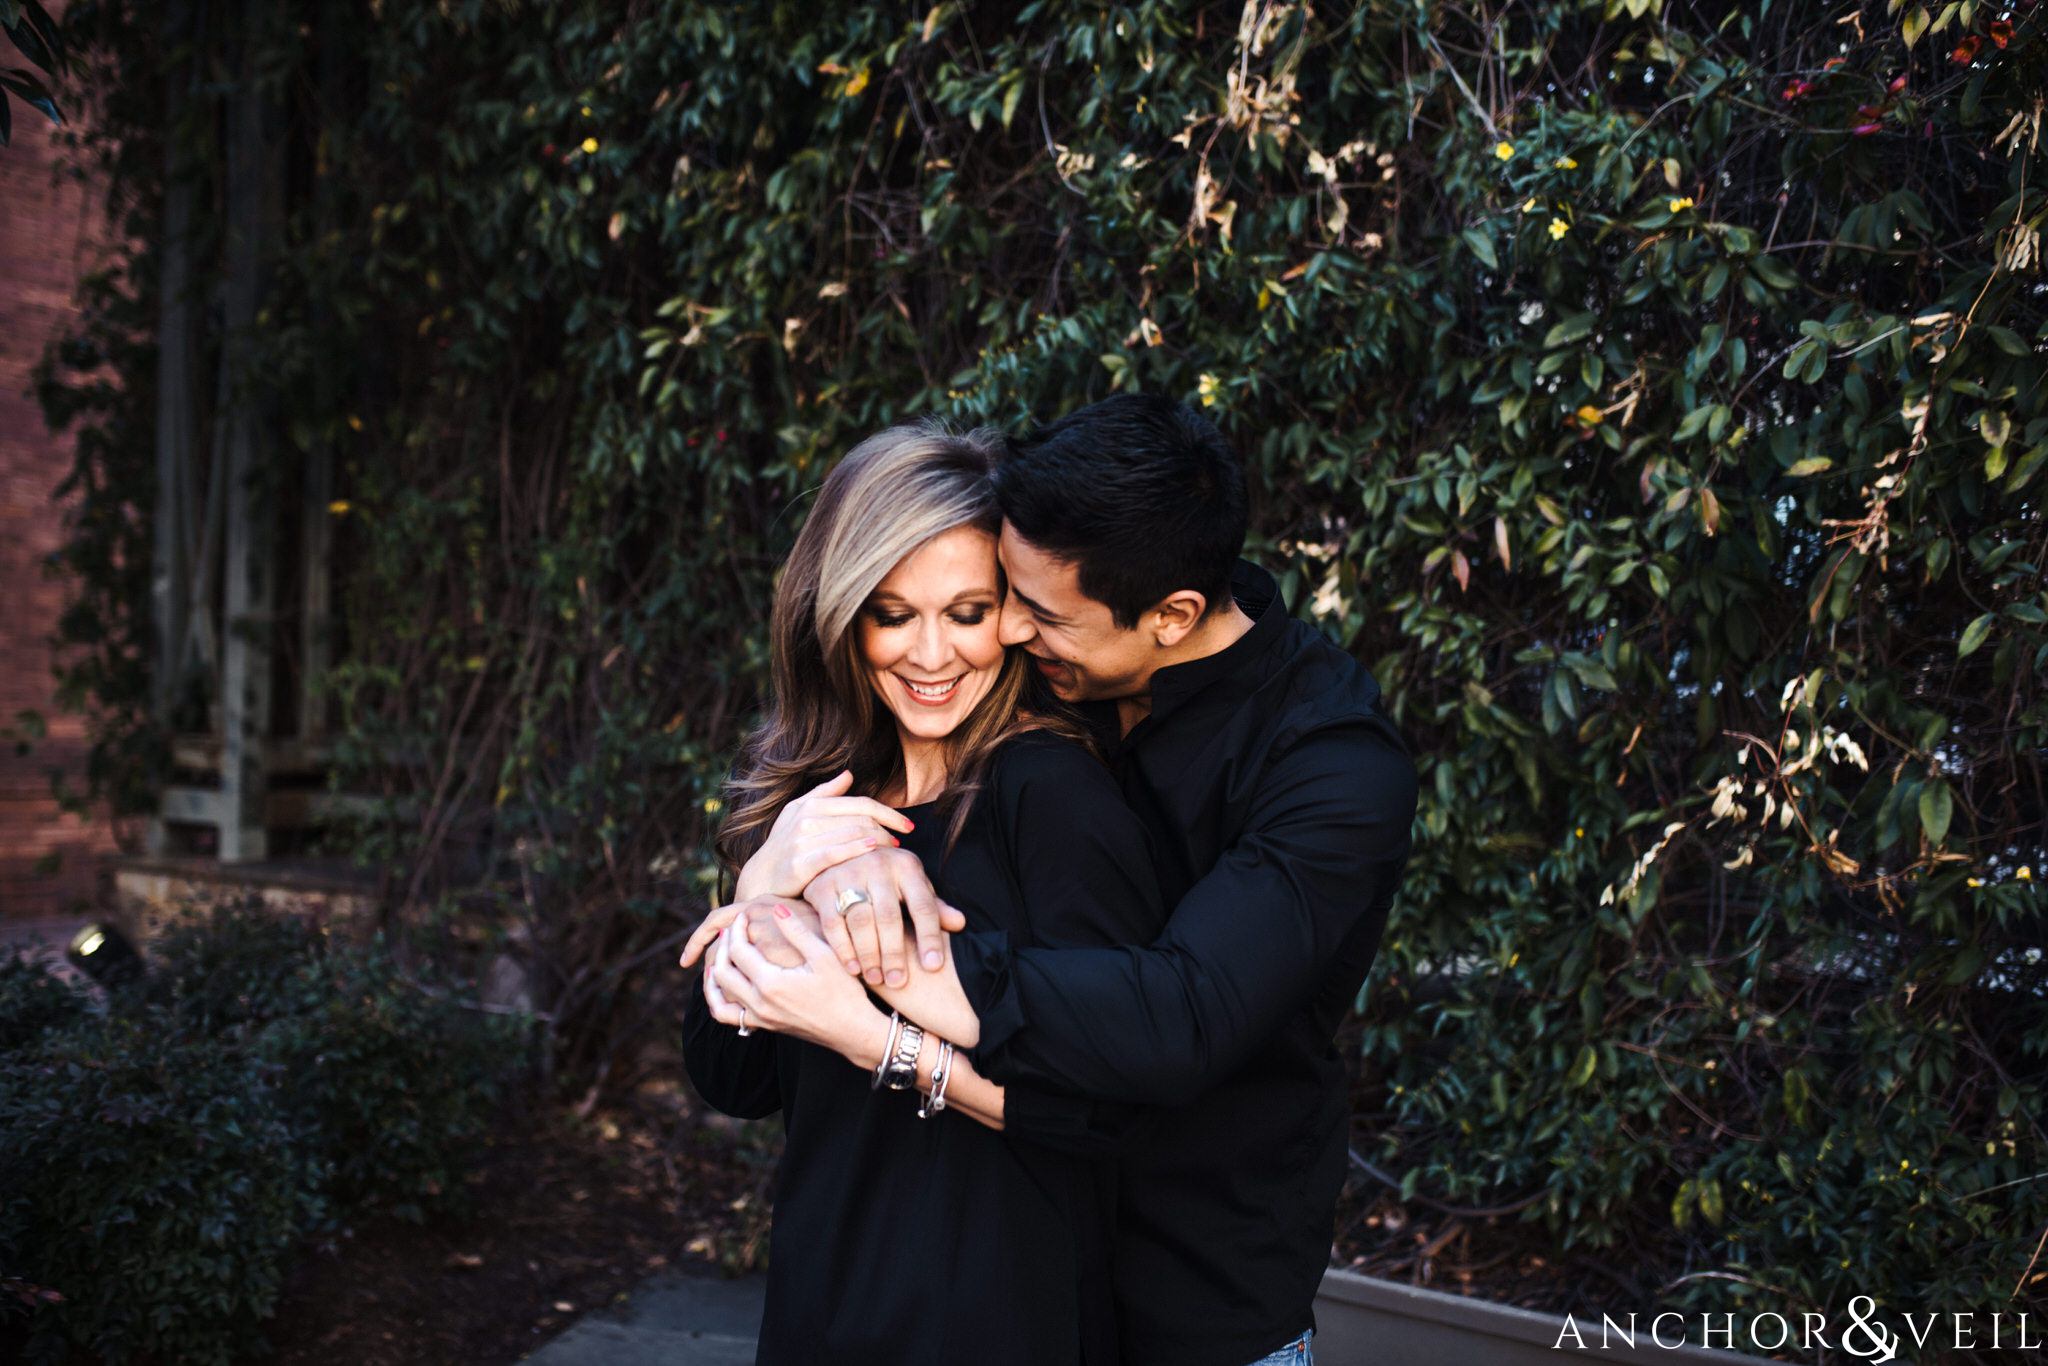 Holding her tight in the Ivy During their Uptown Charlotte Engagement Session